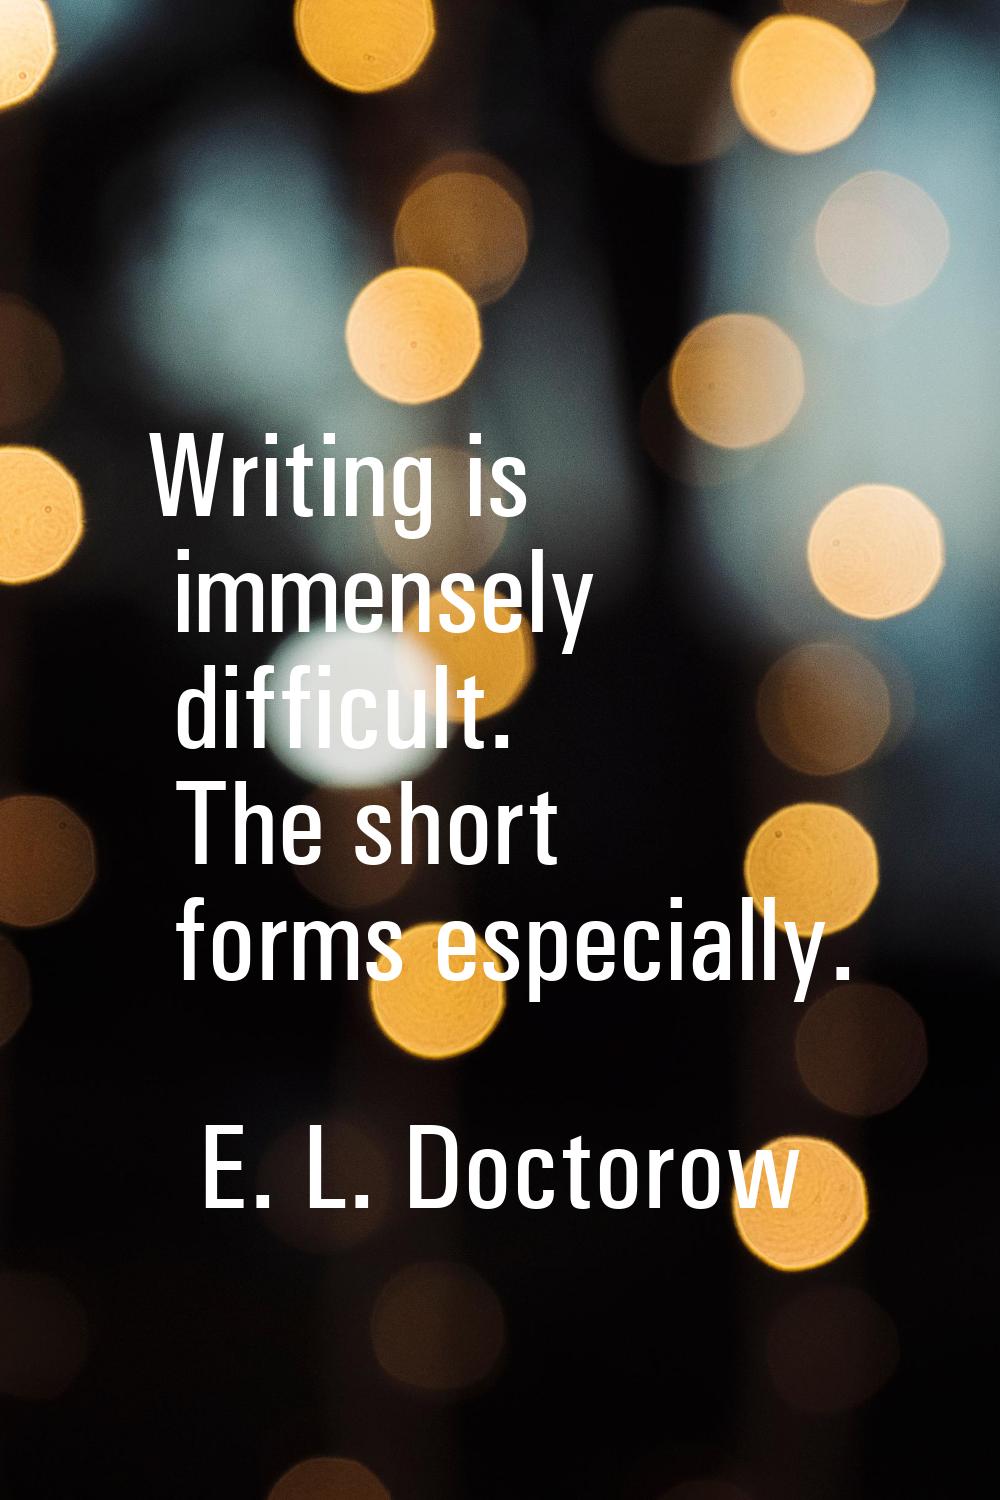 Writing is immensely difficult. The short forms especially.